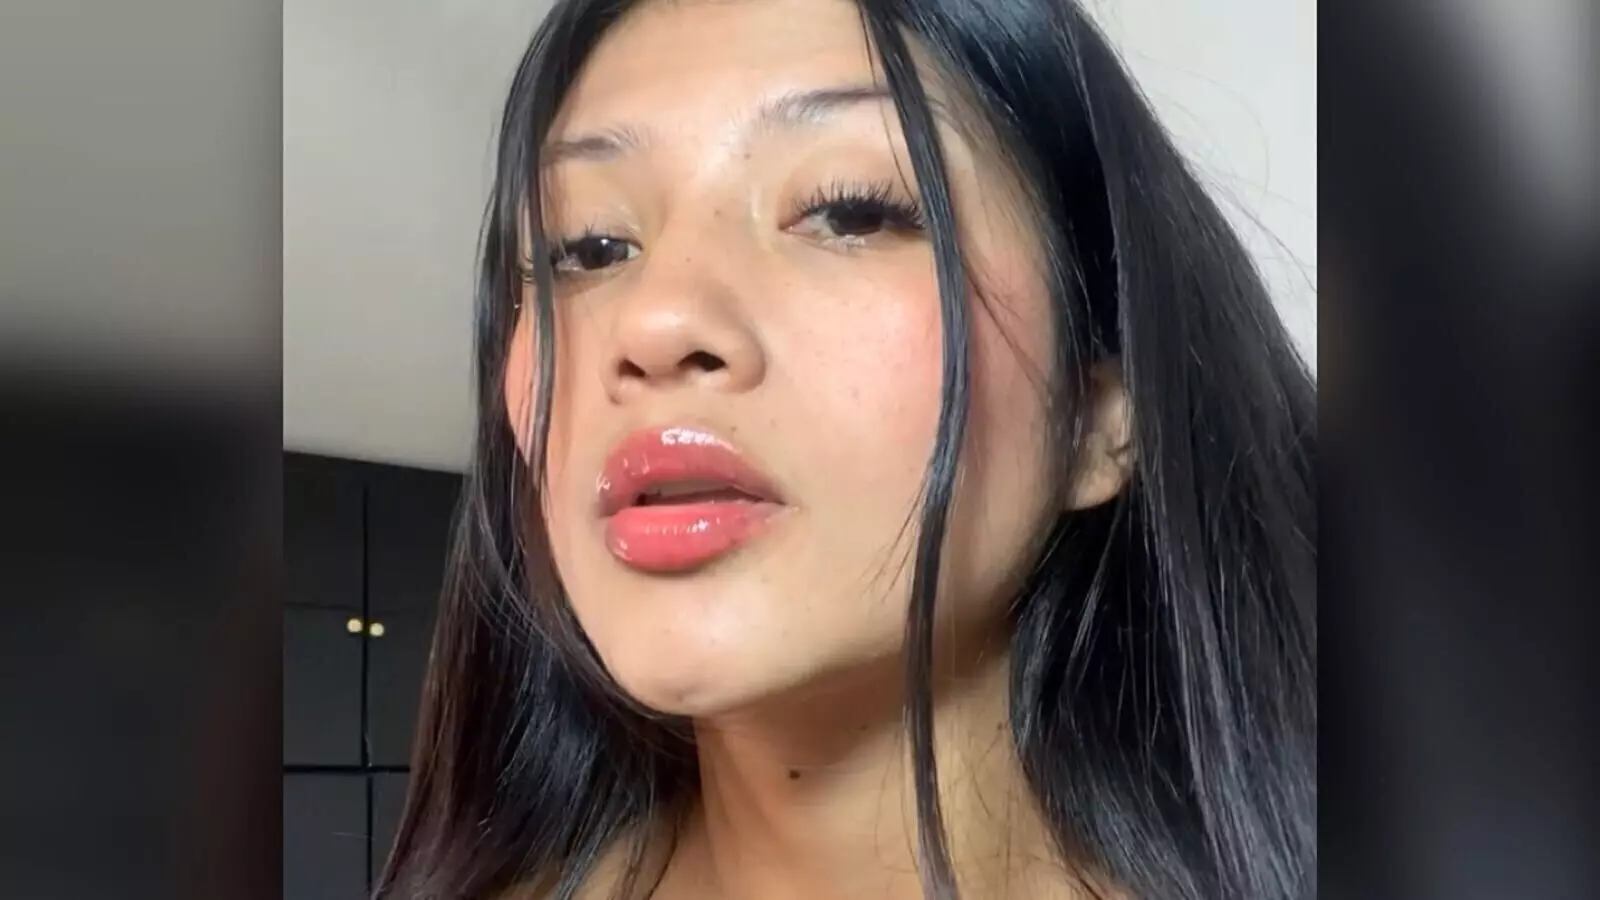  RELATED VIDEOS - WEBCAM KimHawker STRIPS AND MASTURBATES